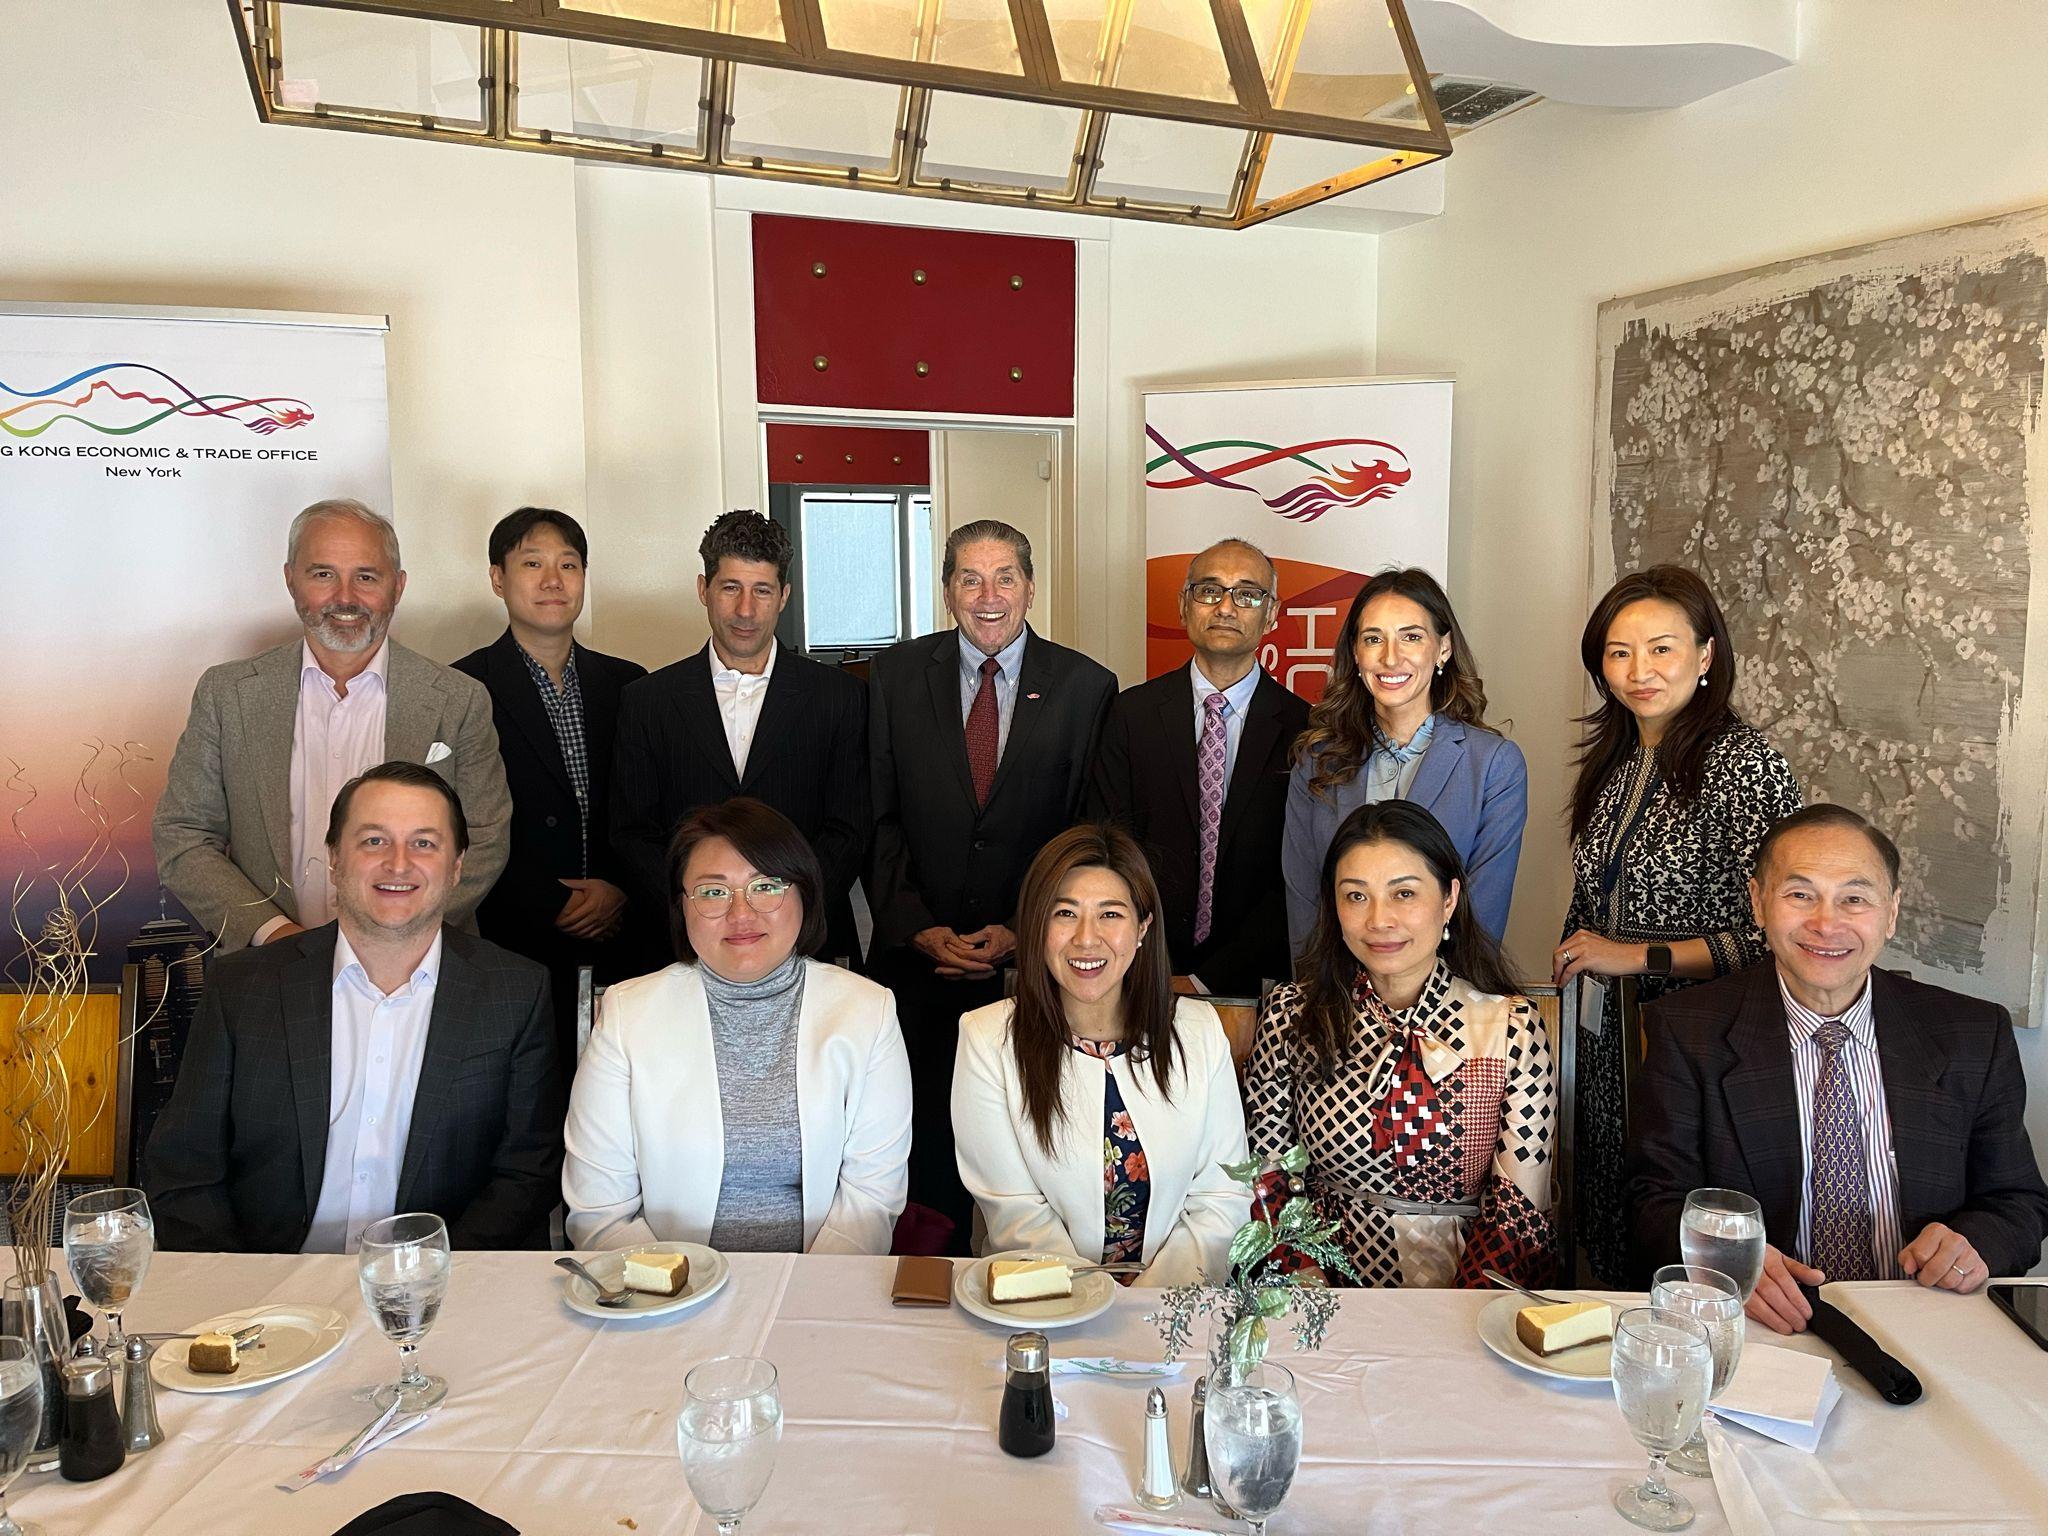 The Director of the Hong Kong Economic and Trade Office, New York, Ms Maisie Ho, promoted Hong Kong's fintech and innovation and technology during her three-day duty visit in Atlanta, Georgia from February 21 to 23 (Atlanta time). Photo shows Ms Ho (front row, centre) hosting a luncheon on February 22, when she gave a briefing on the latest development of fintech in Hong Kong to the attending representatives from local government, chambers of commerce, advance technology development centres and enterprises in the technology sector.